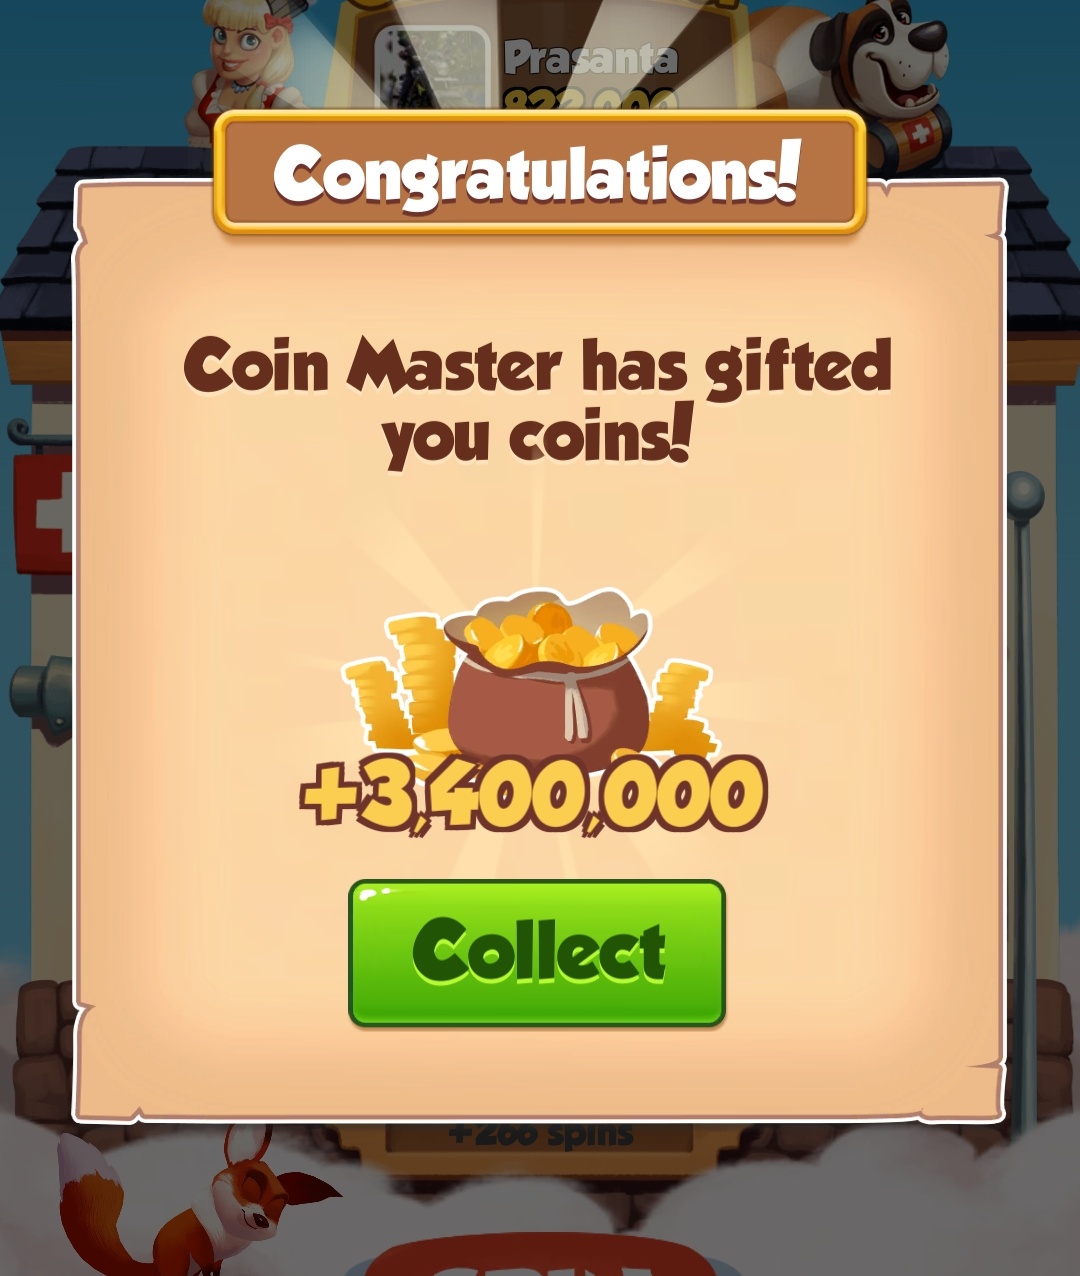 Today new link coin master